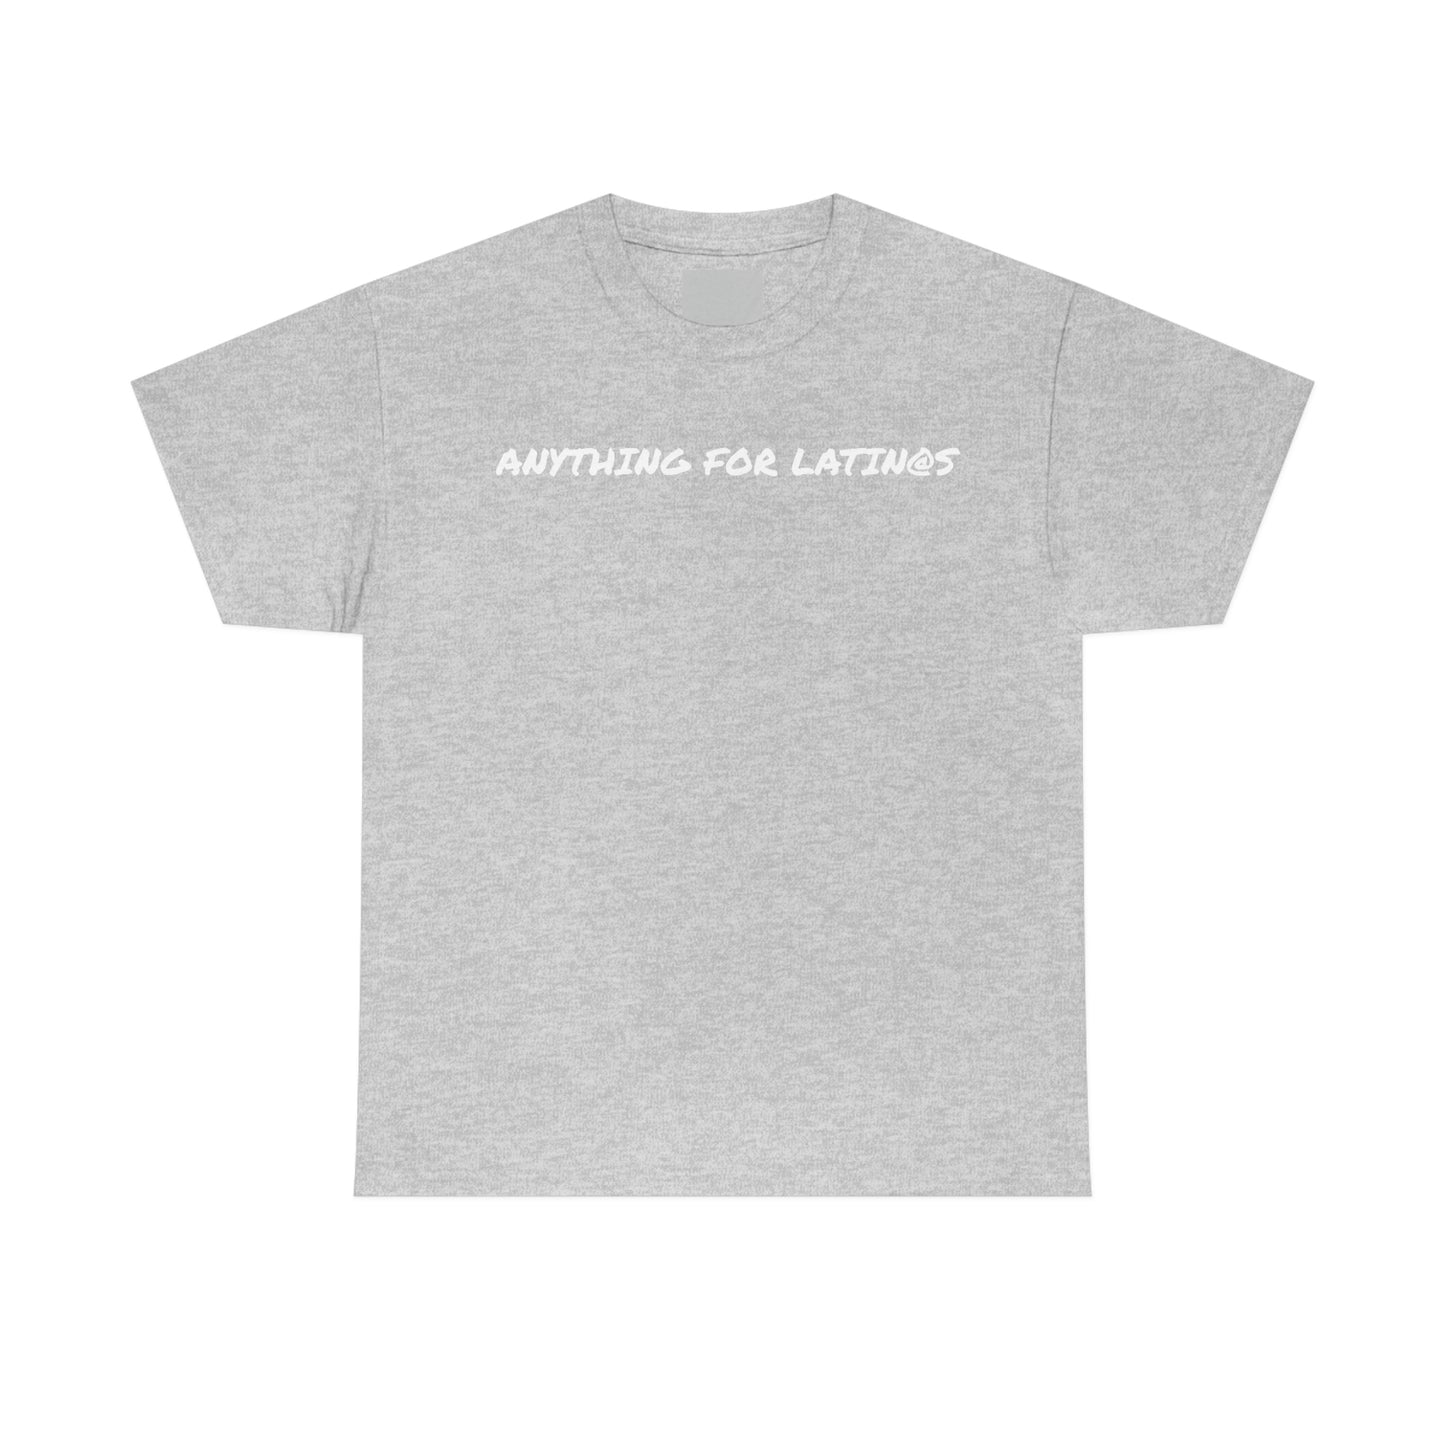 ANYTHING FOR LATIN@S Black One Side Unisex Heavy Cotton Tee